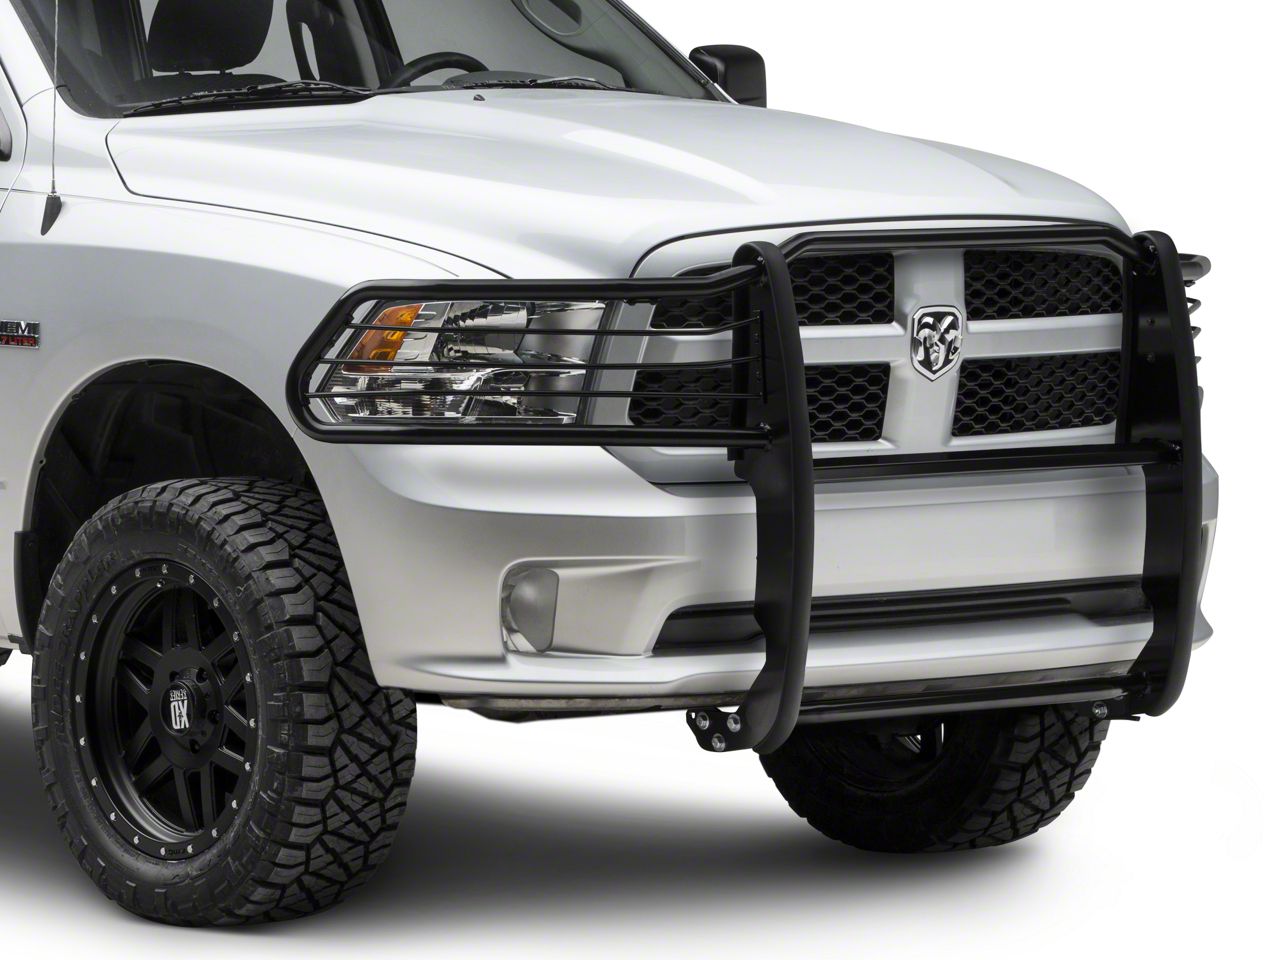 Compatible with Dodge Ram 1500 Sport Front Bumper Protector Brush Grille Guard Chrome 